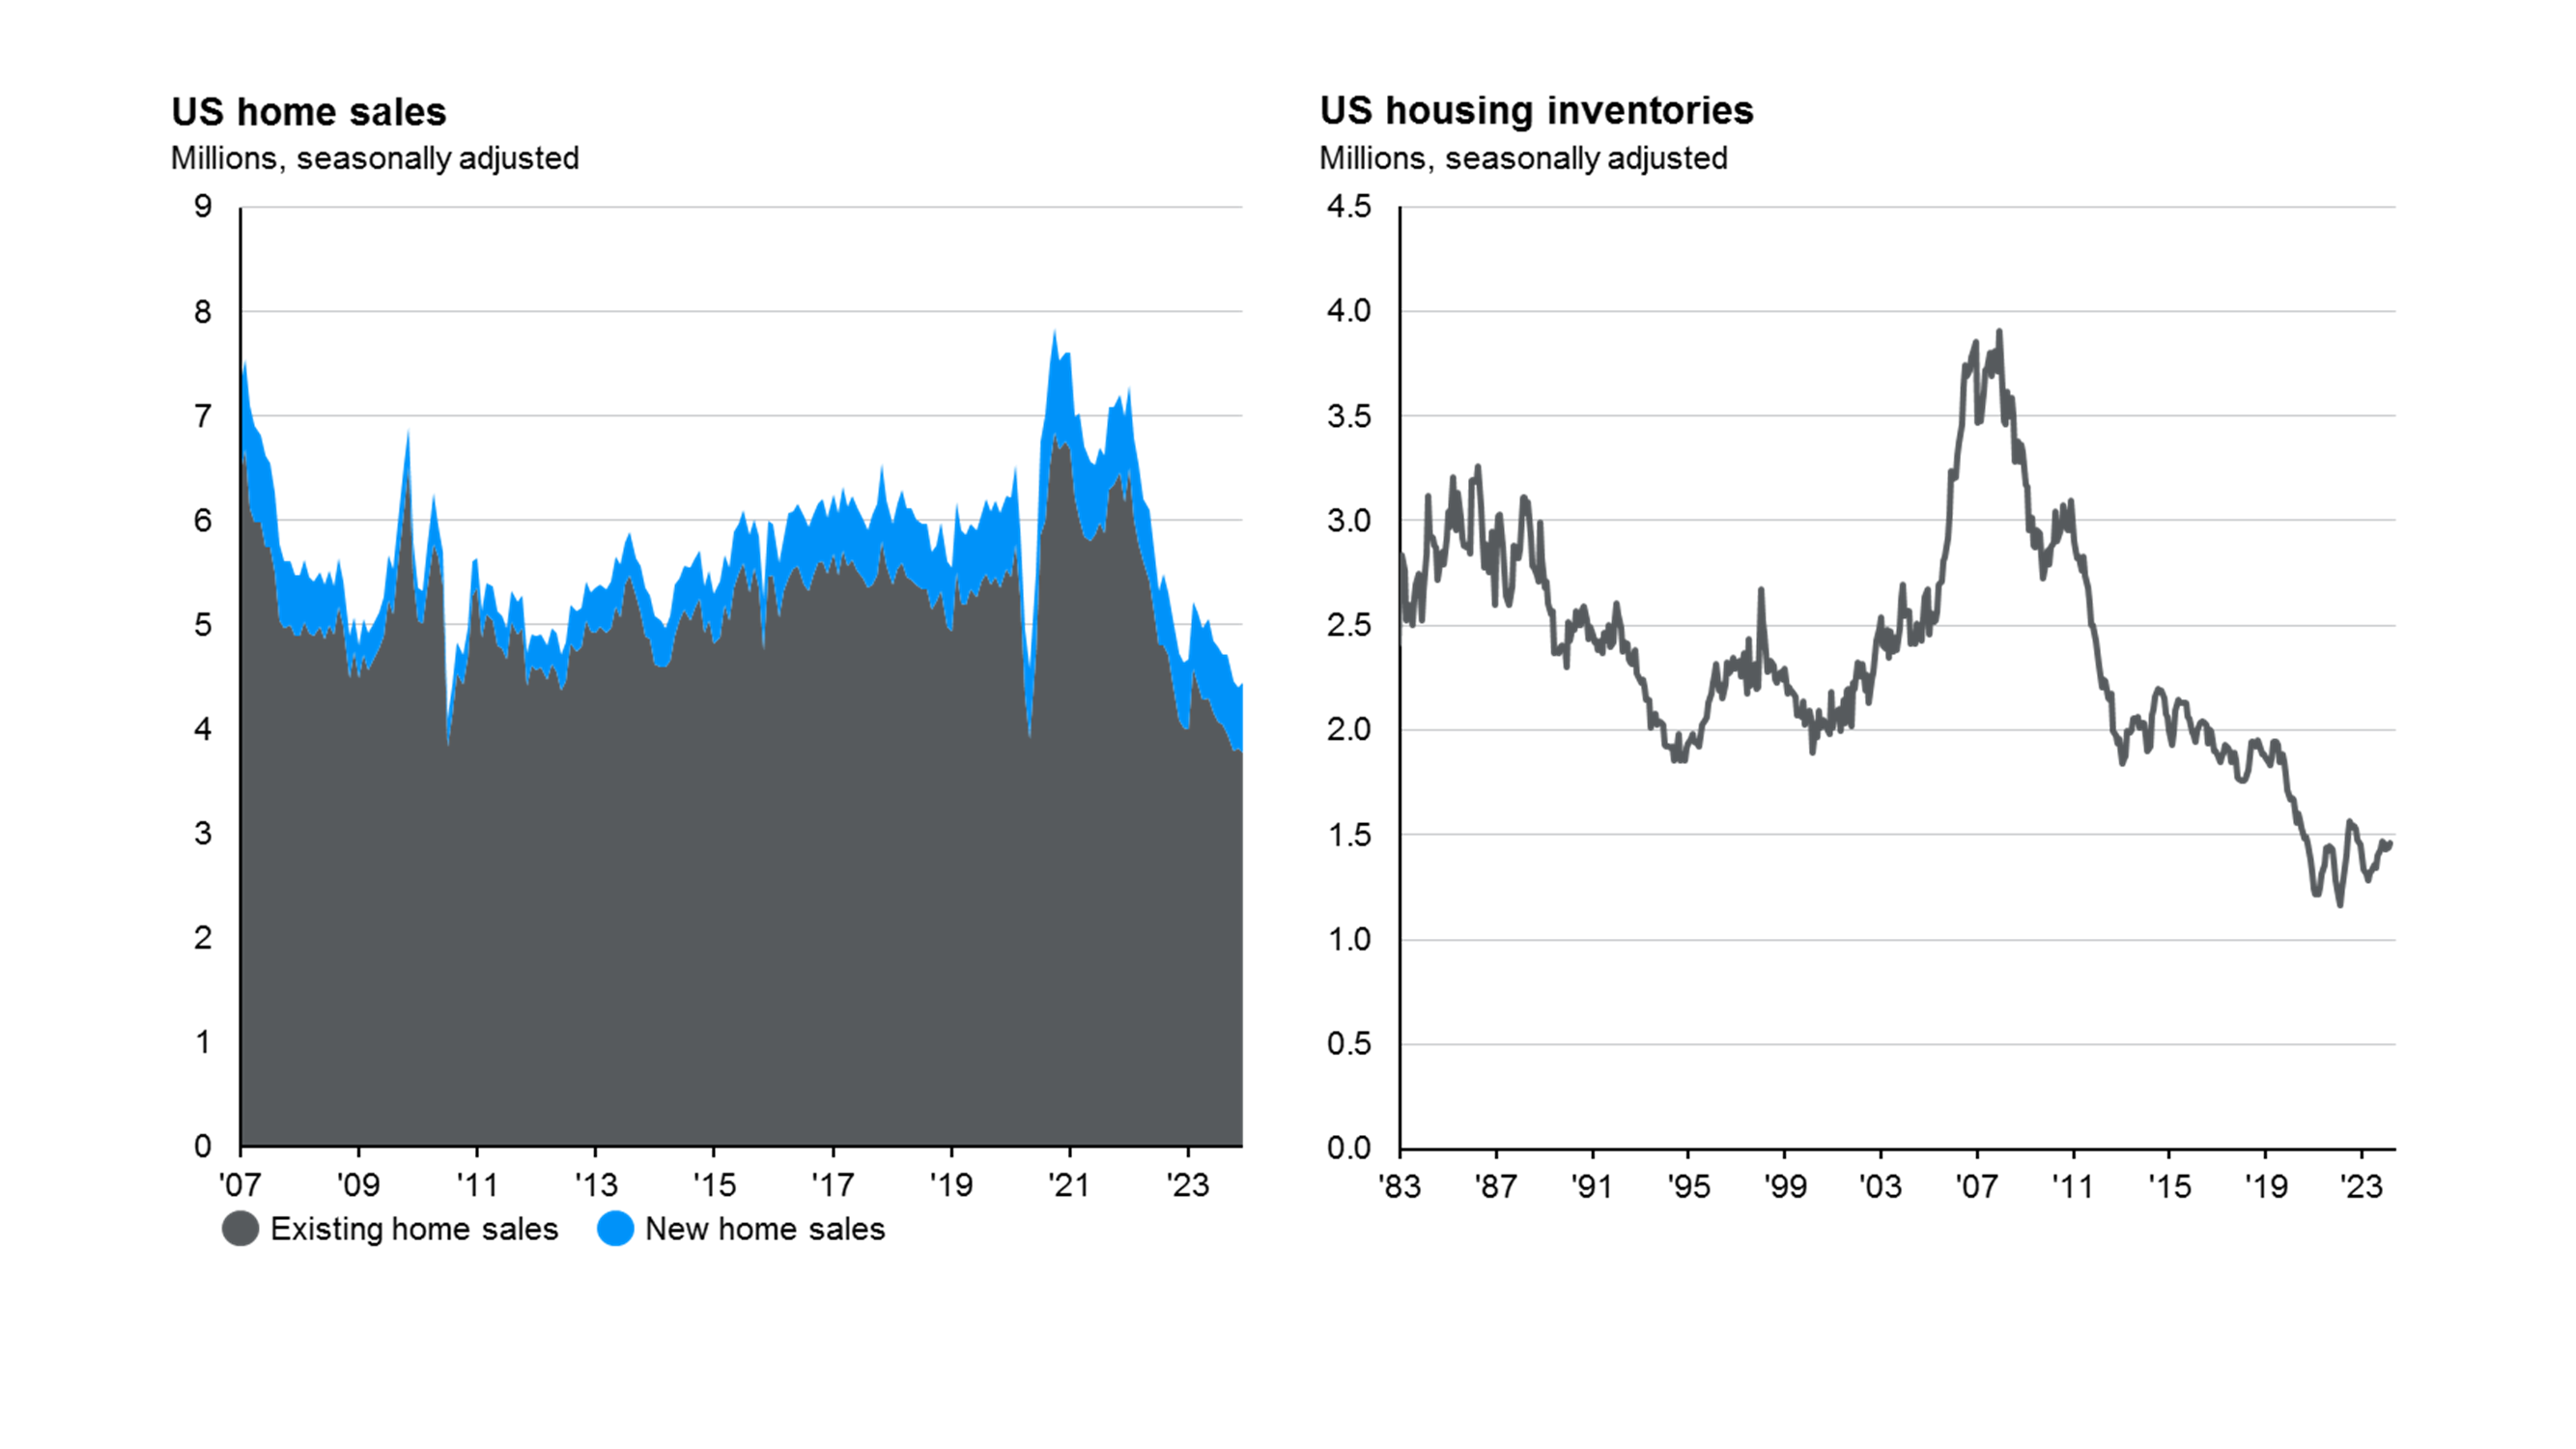 US housing activity and inventories